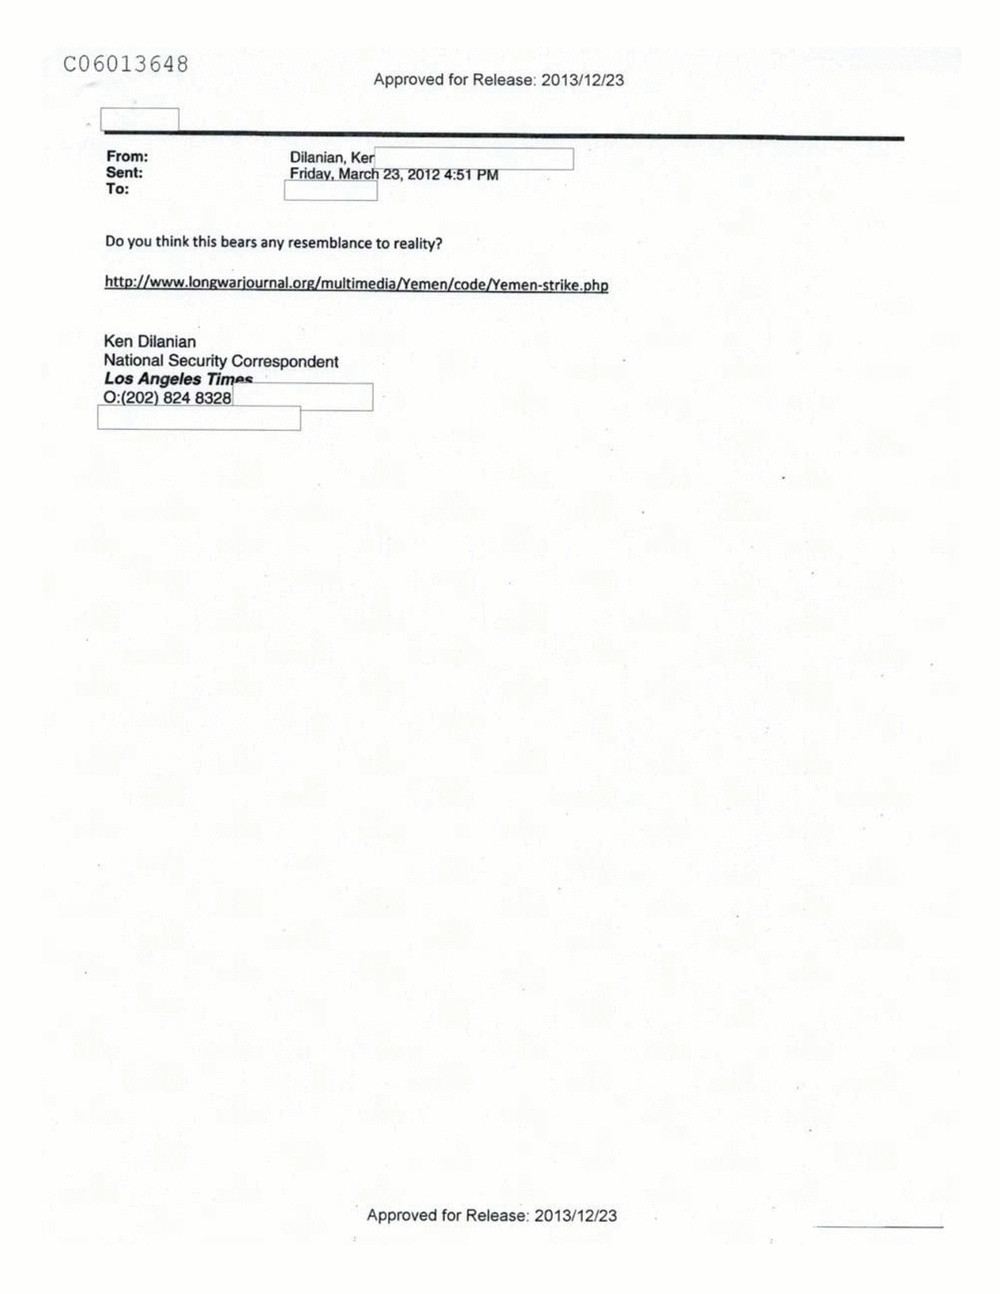 Page 495 from Email Correspondence Between Reporters and CIA Flacks